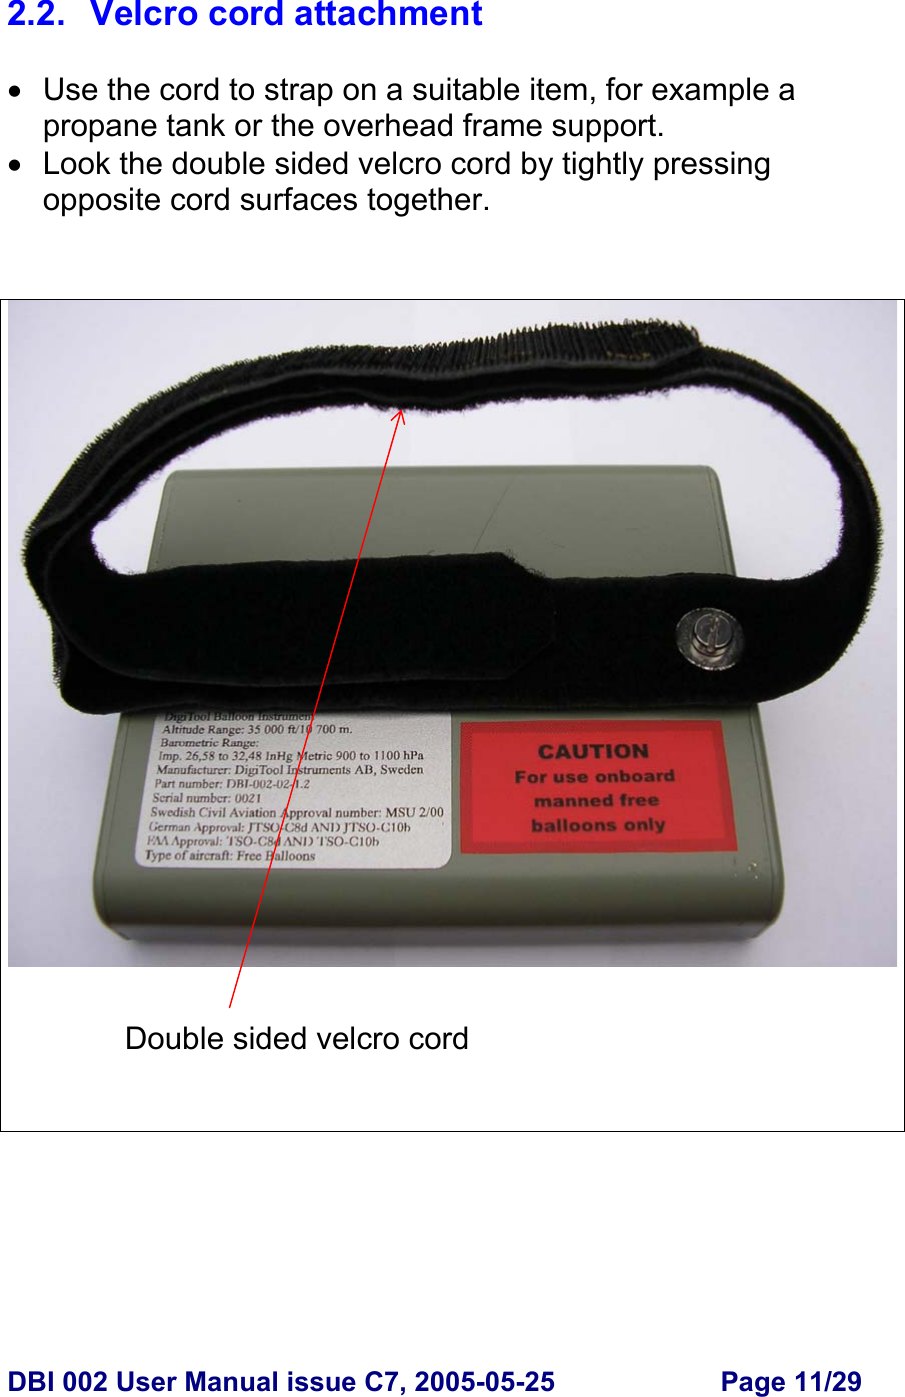  DBI 002 User Manual issue C7, 2005-05-25  Page 11/29  2.2.  Velcro cord attachment  •  Use the cord to strap on a suitable item, for example a propane tank or the overhead frame support. •  Look the double sided velcro cord by tightly pressing opposite cord surfaces together.     Double sided velcro cord 